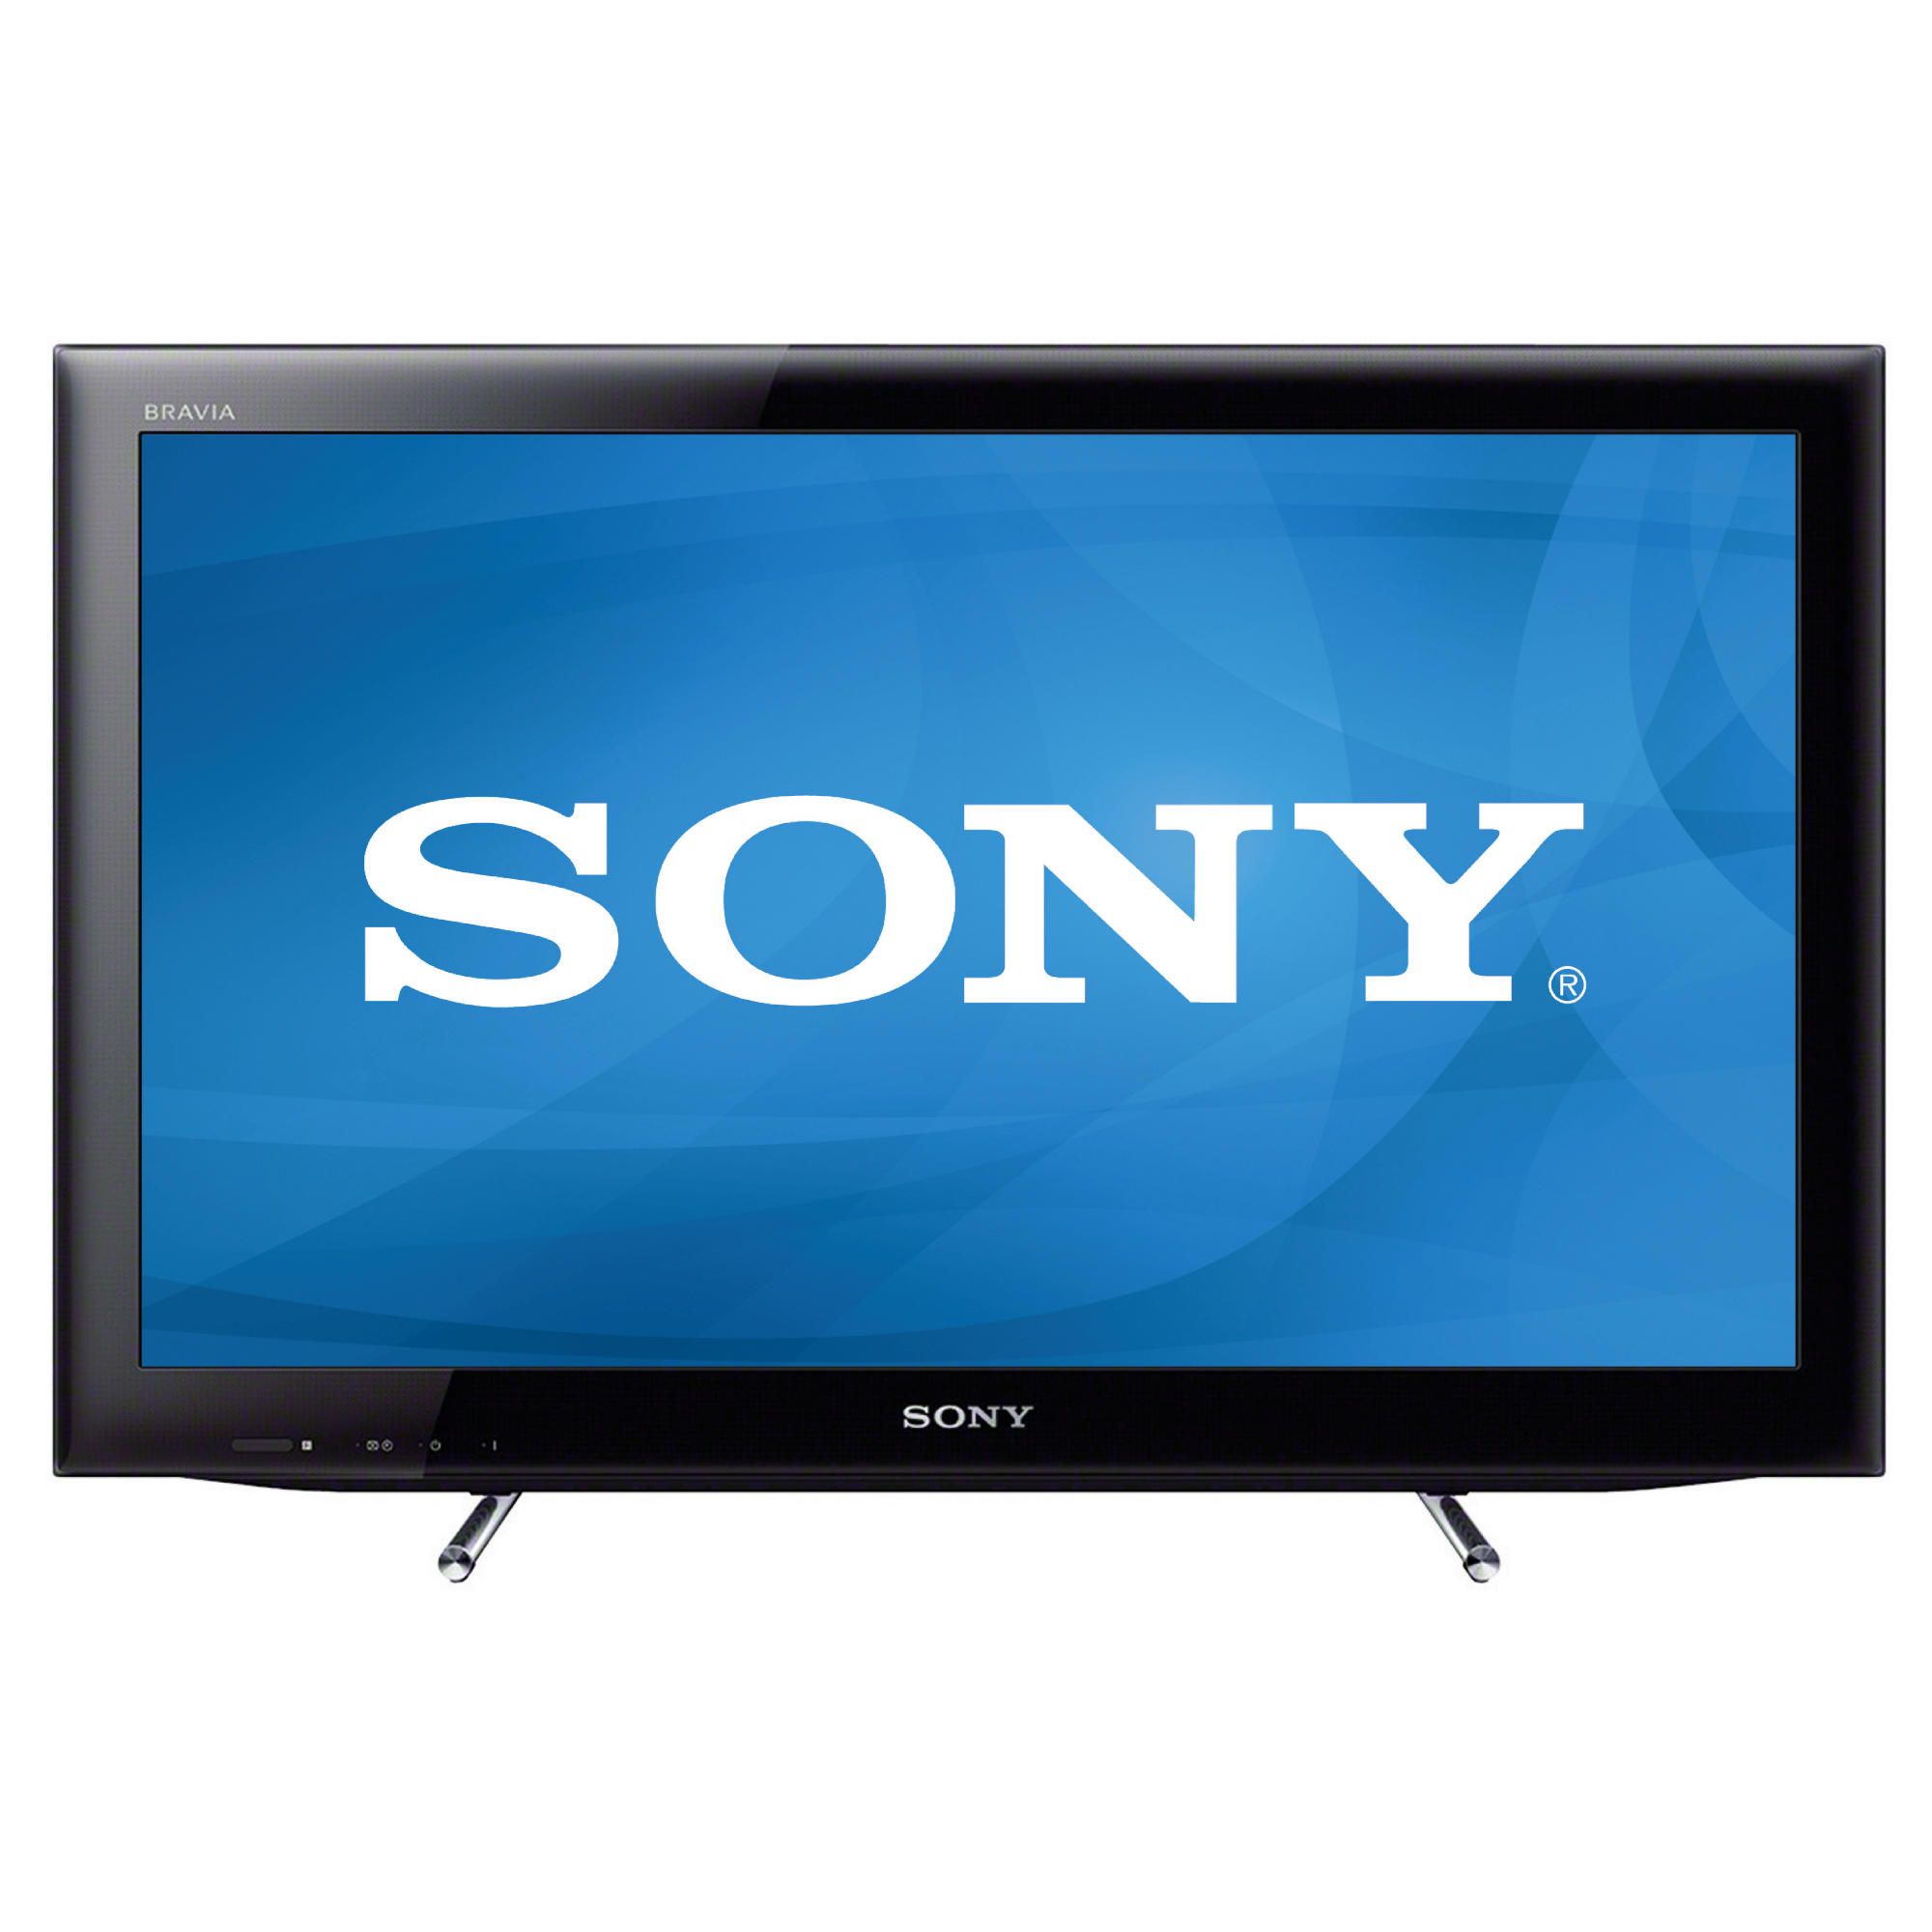 Sony KDL26EX553 26-inch HD LED TV with WiFi Freeview HD and Sony Internet TV